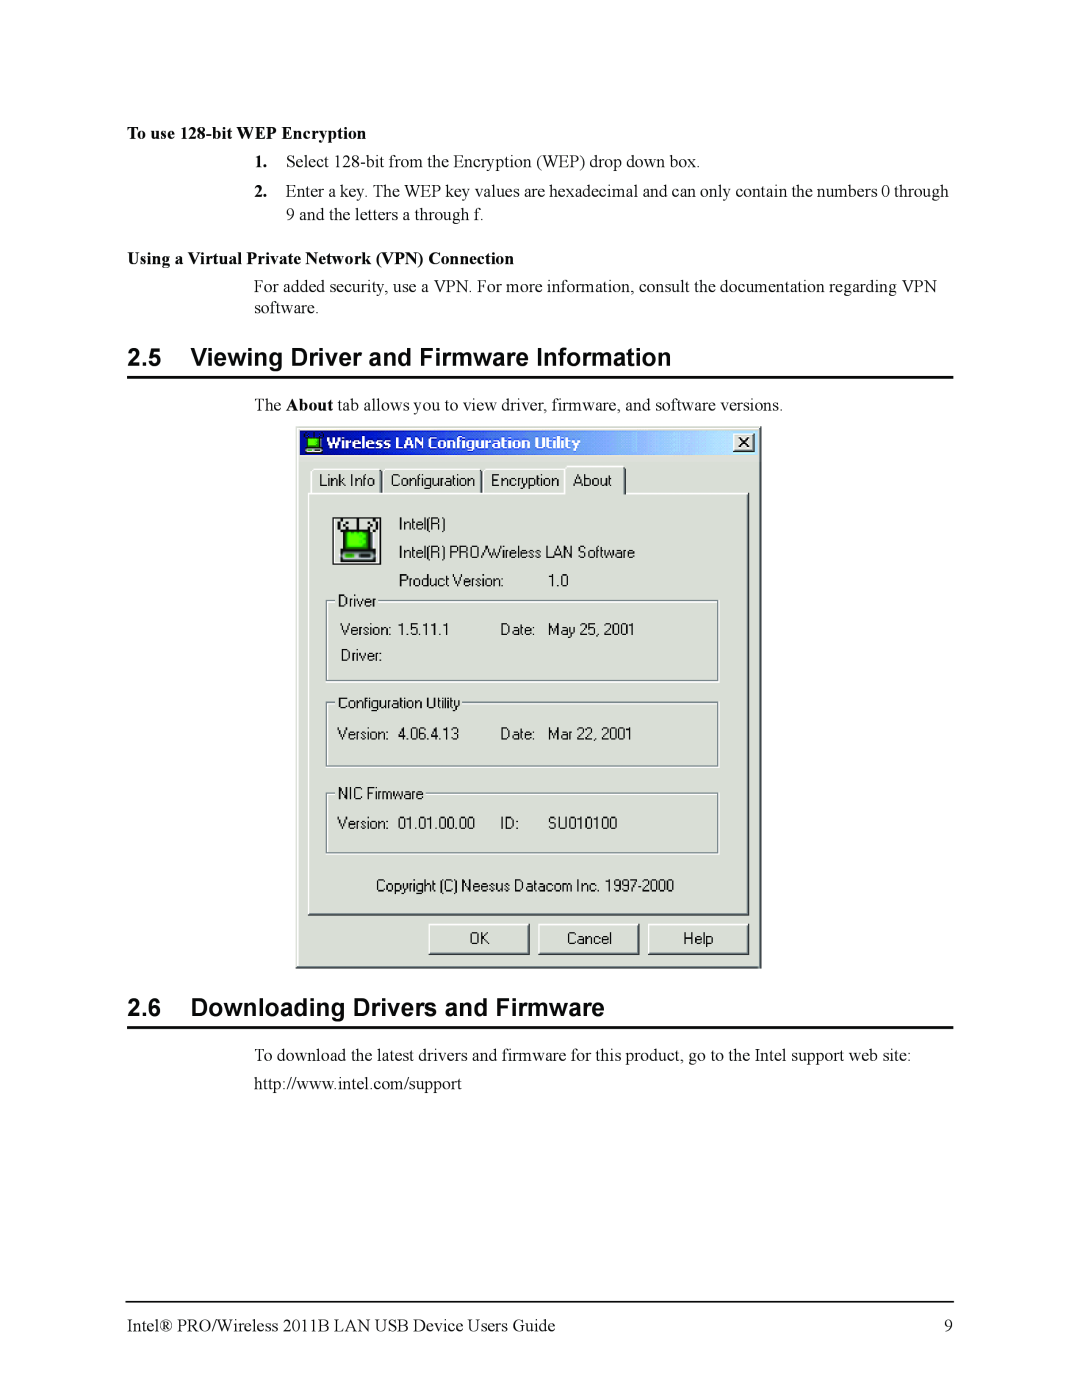 Intel 2011B 2.5Viewing Driver and Firmware Information, 2.6Downloading Drivers and Firmware, To use 128-bitWEP Encryption 